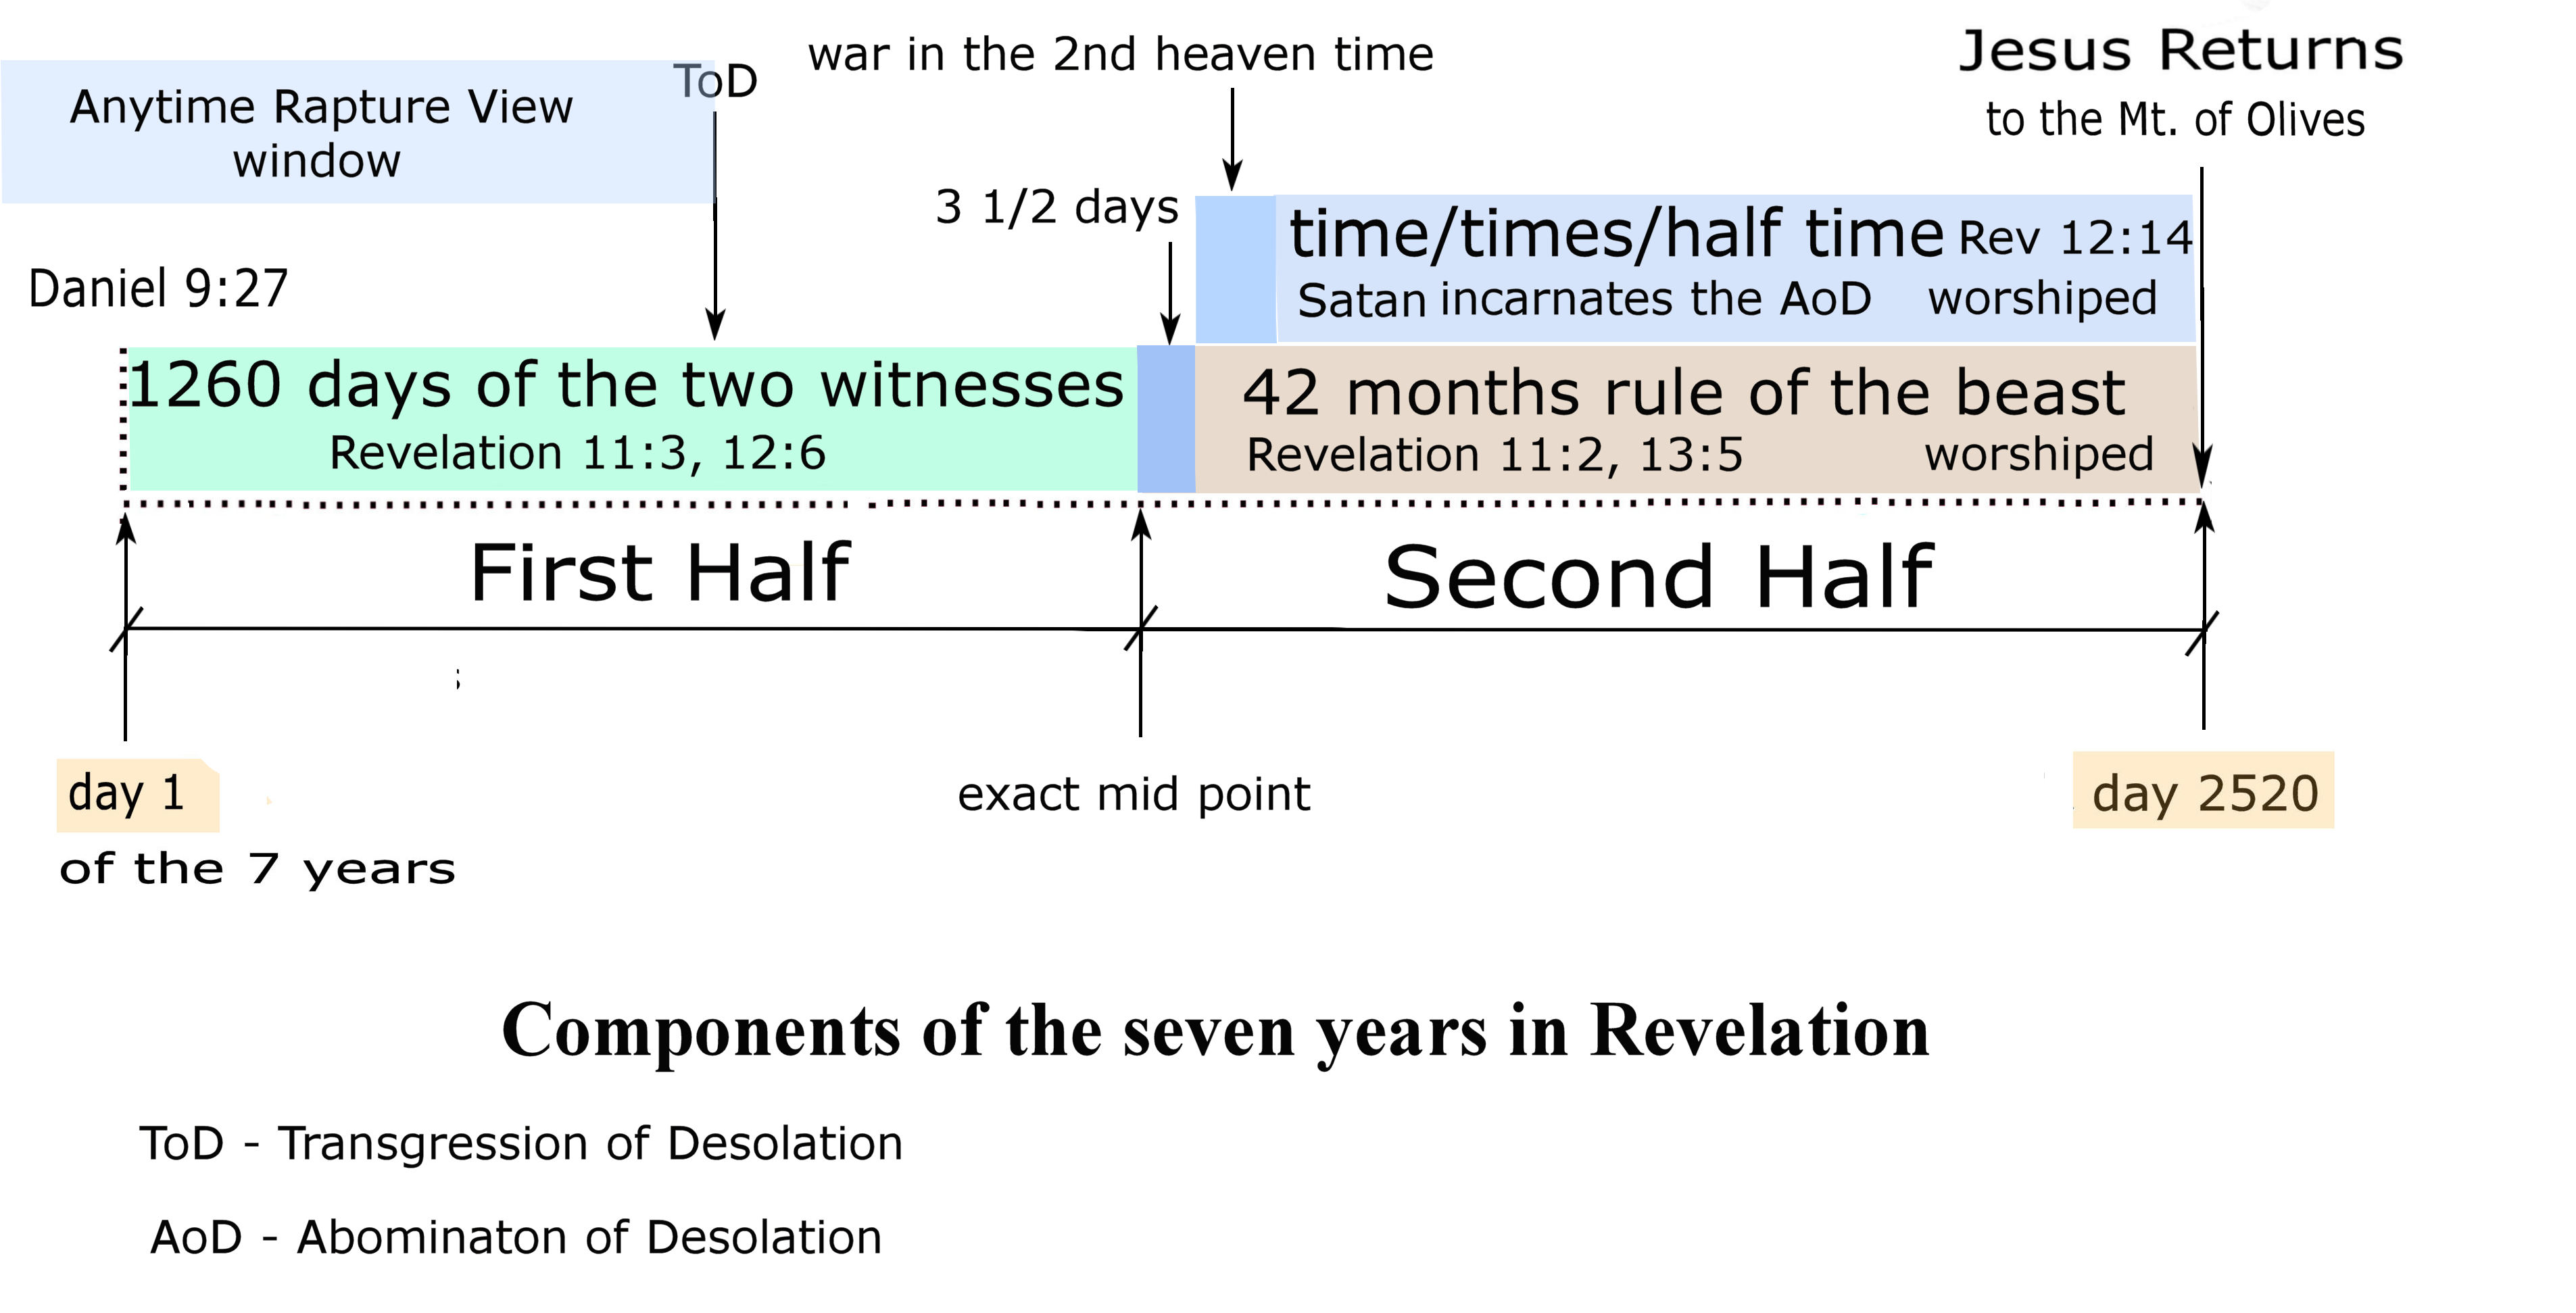 compoinets of the seven years in Revelaiton3 .jpg